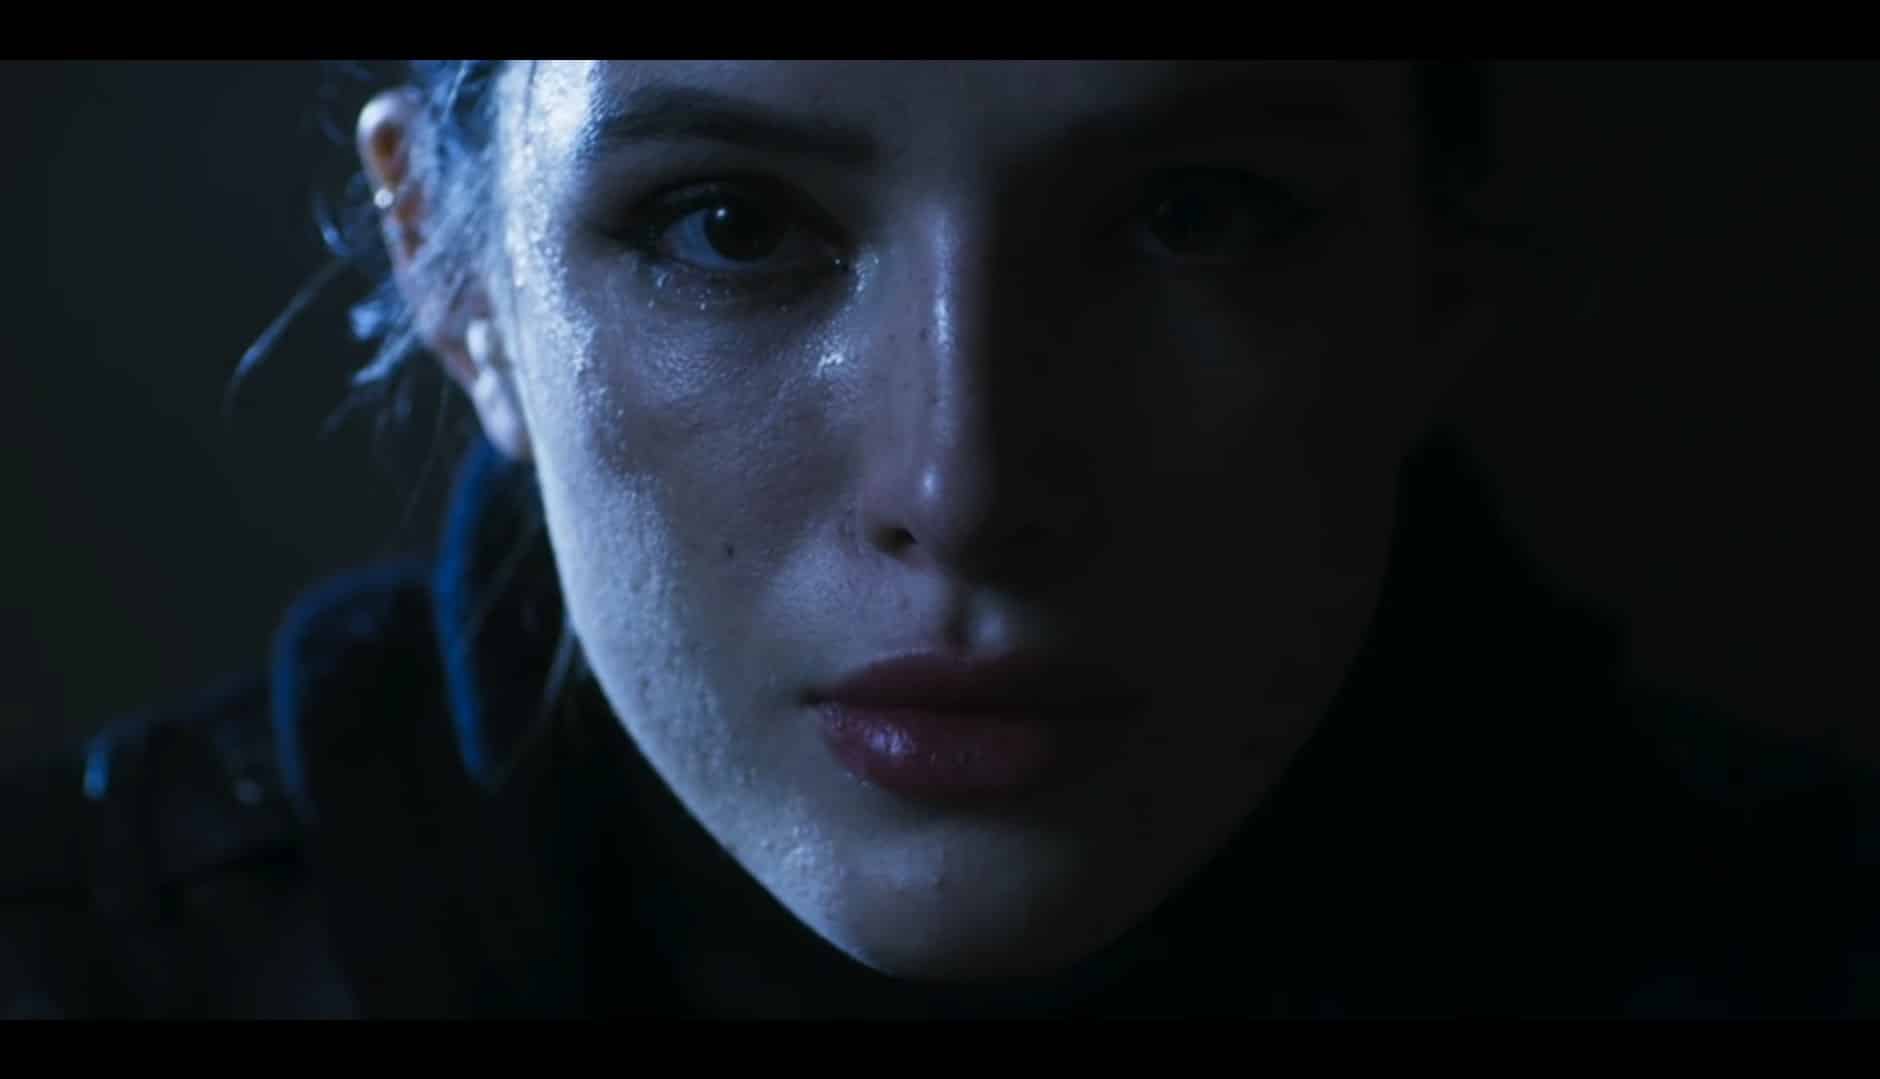 Rose (Bella Thorne) starring at the face of the man who killed her parents